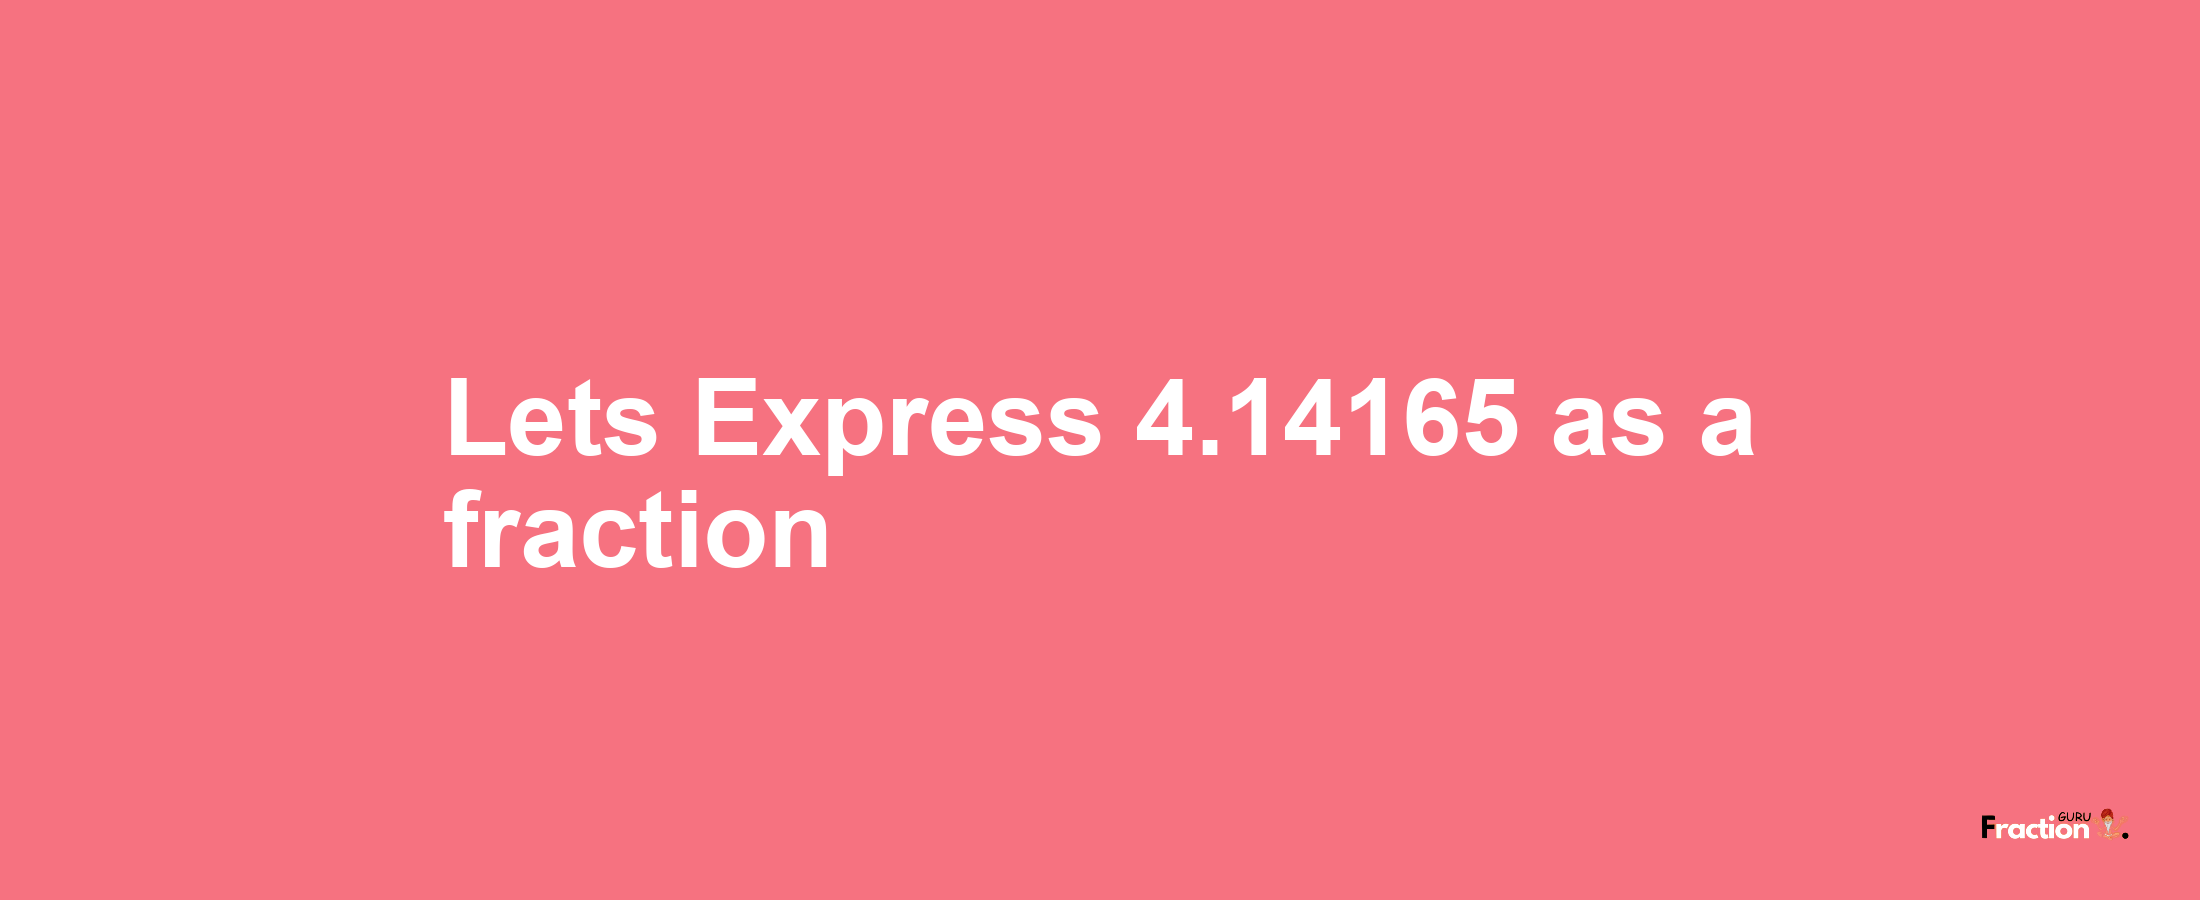 Lets Express 4.14165 as afraction